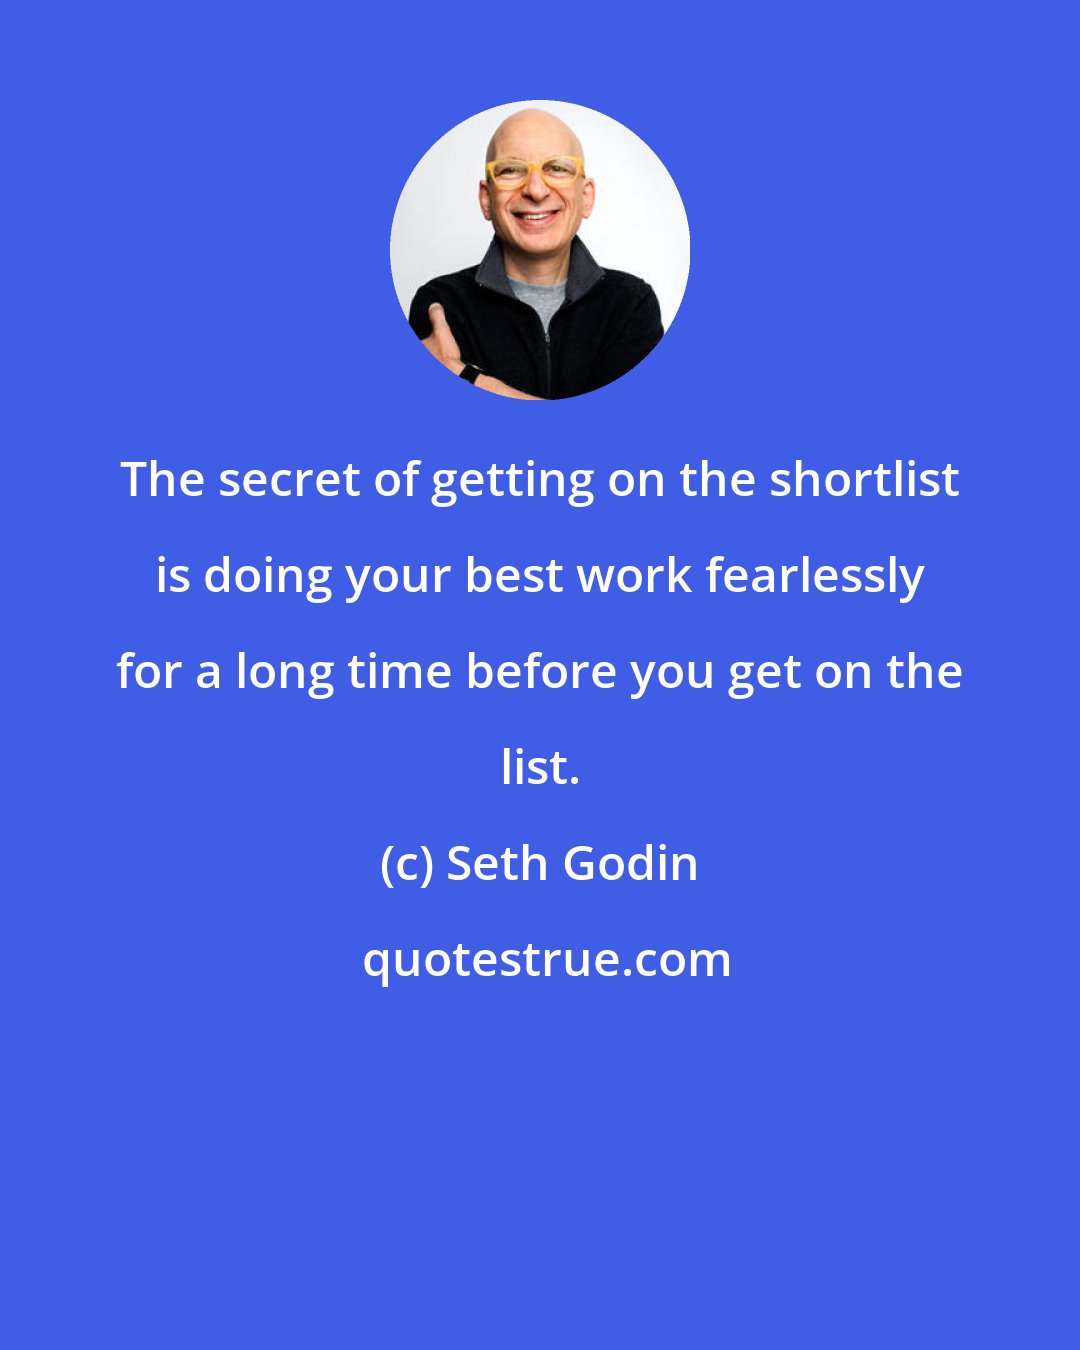 Seth Godin: The secret of getting on the shortlist is doing your best work fearlessly for a long time before you get on the list.